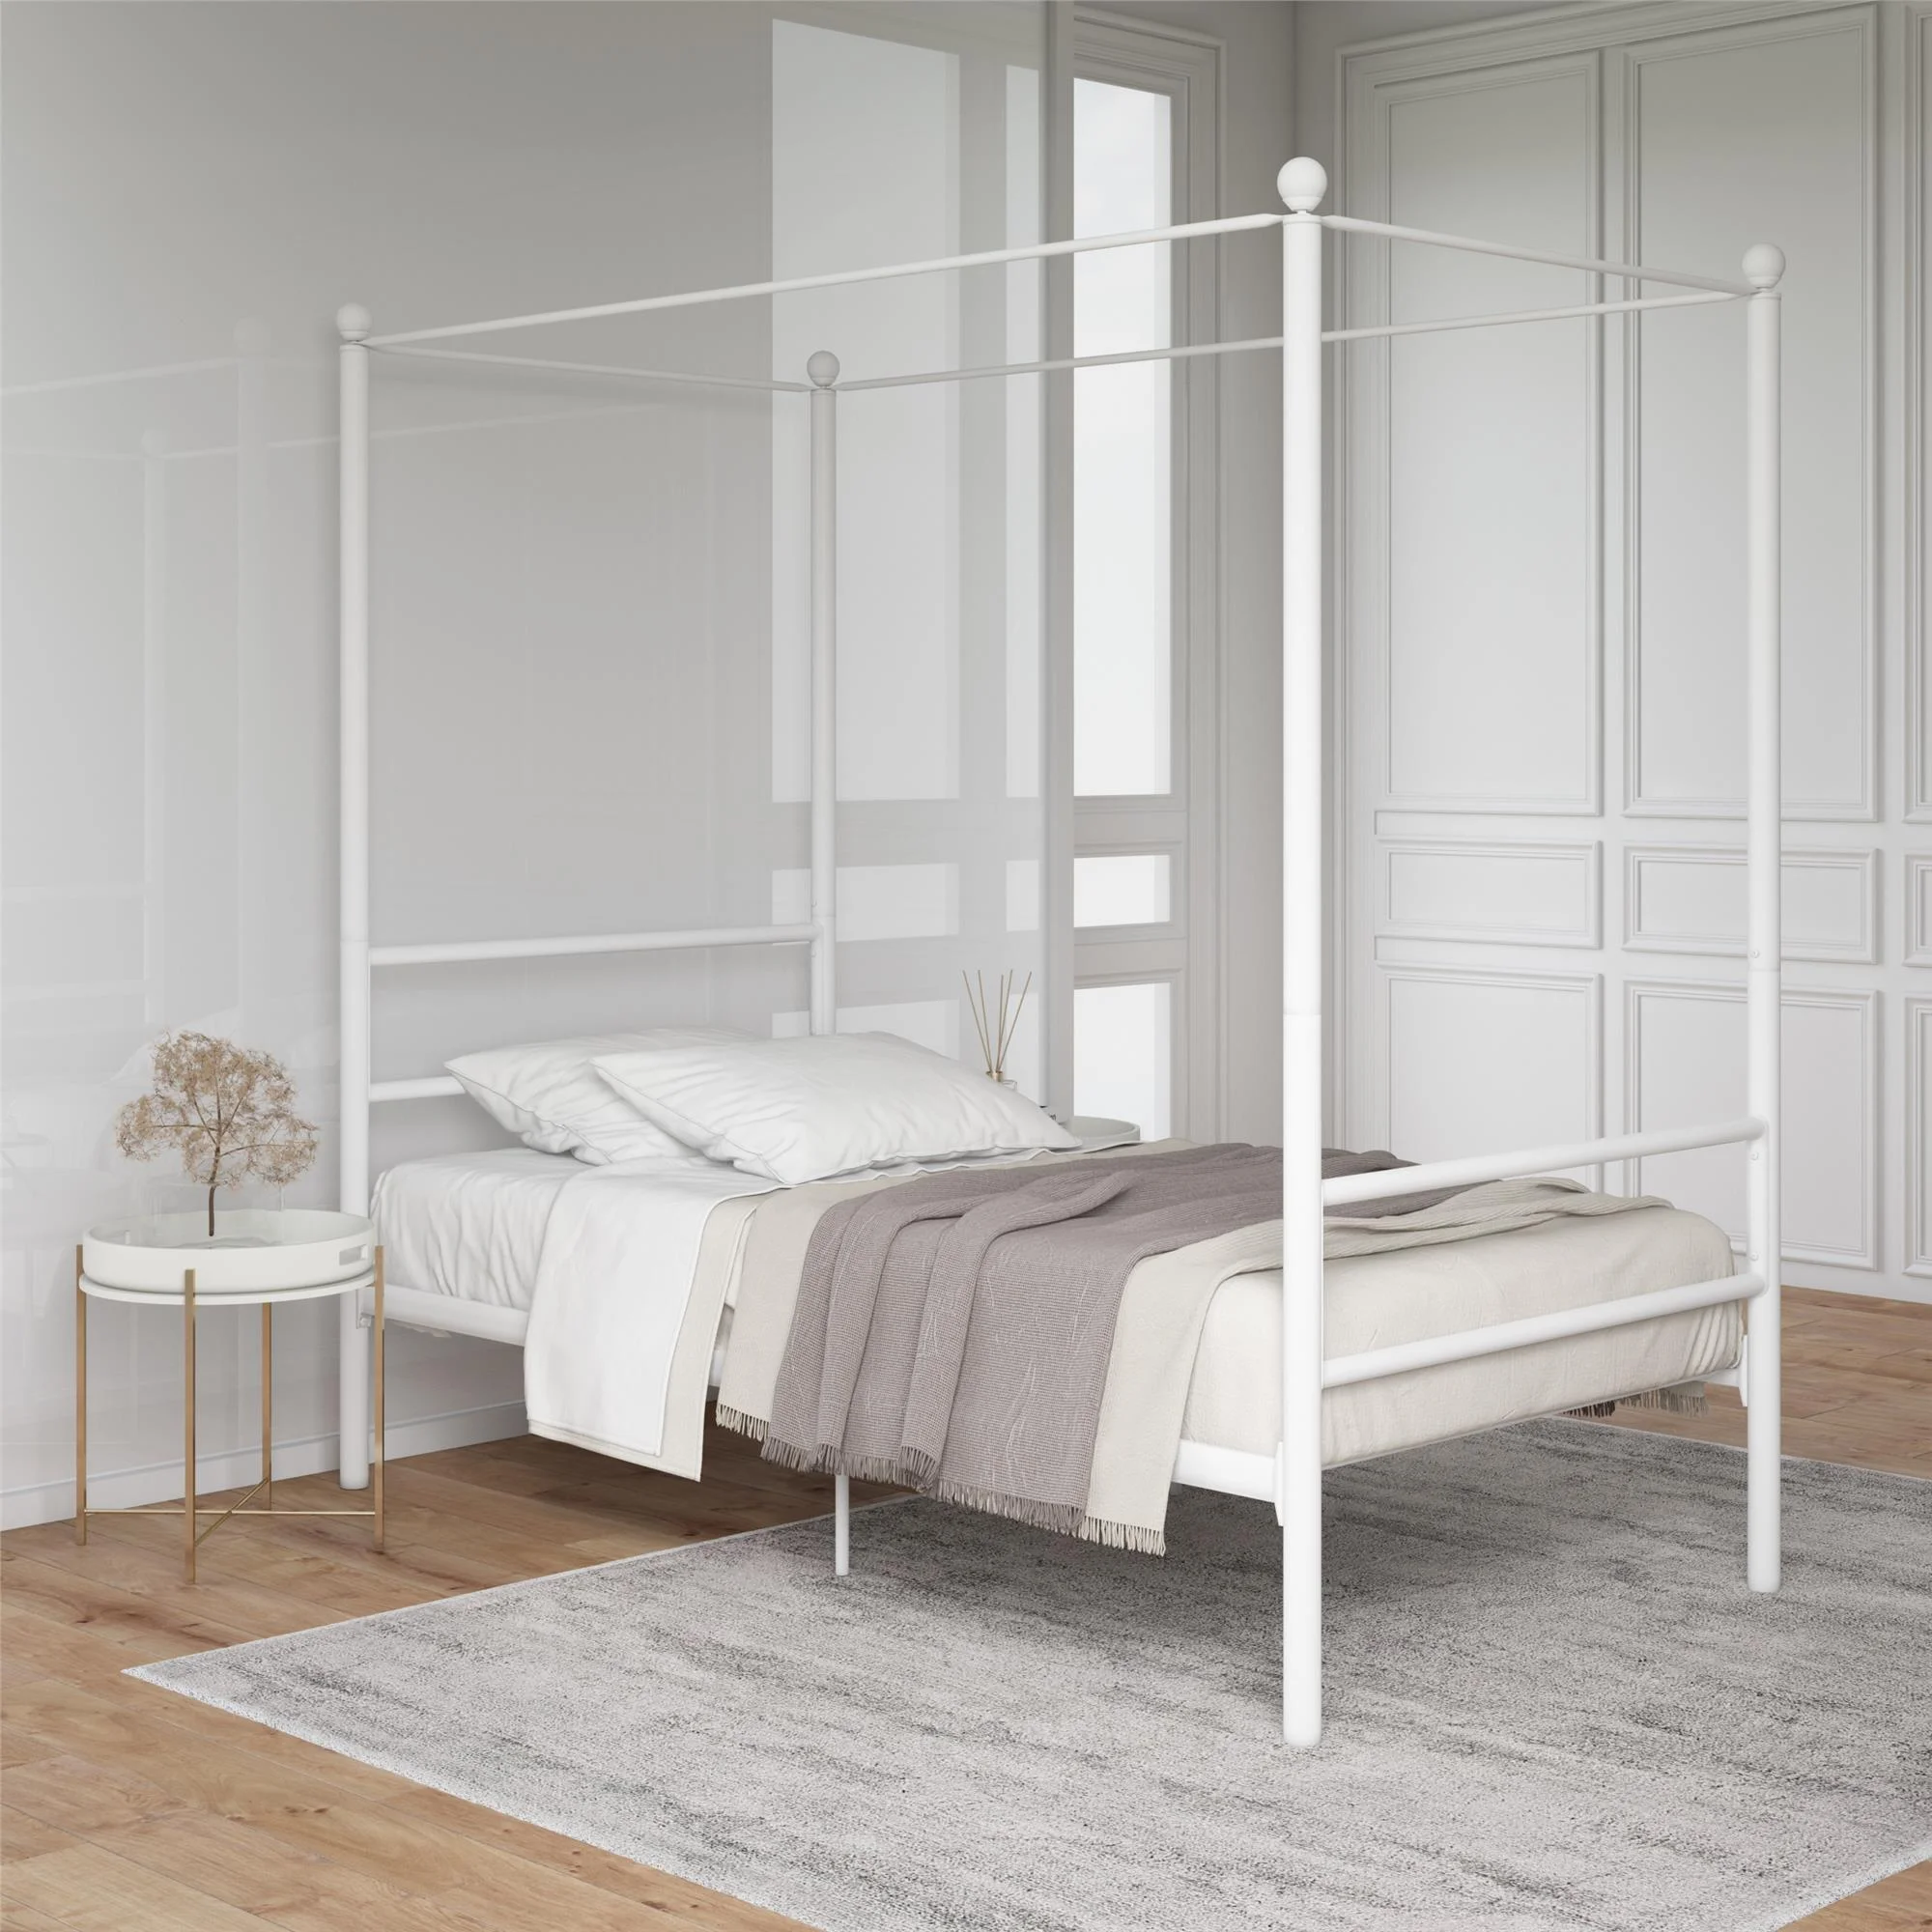 Mainstays Metal Canopy Bed, Twin, White